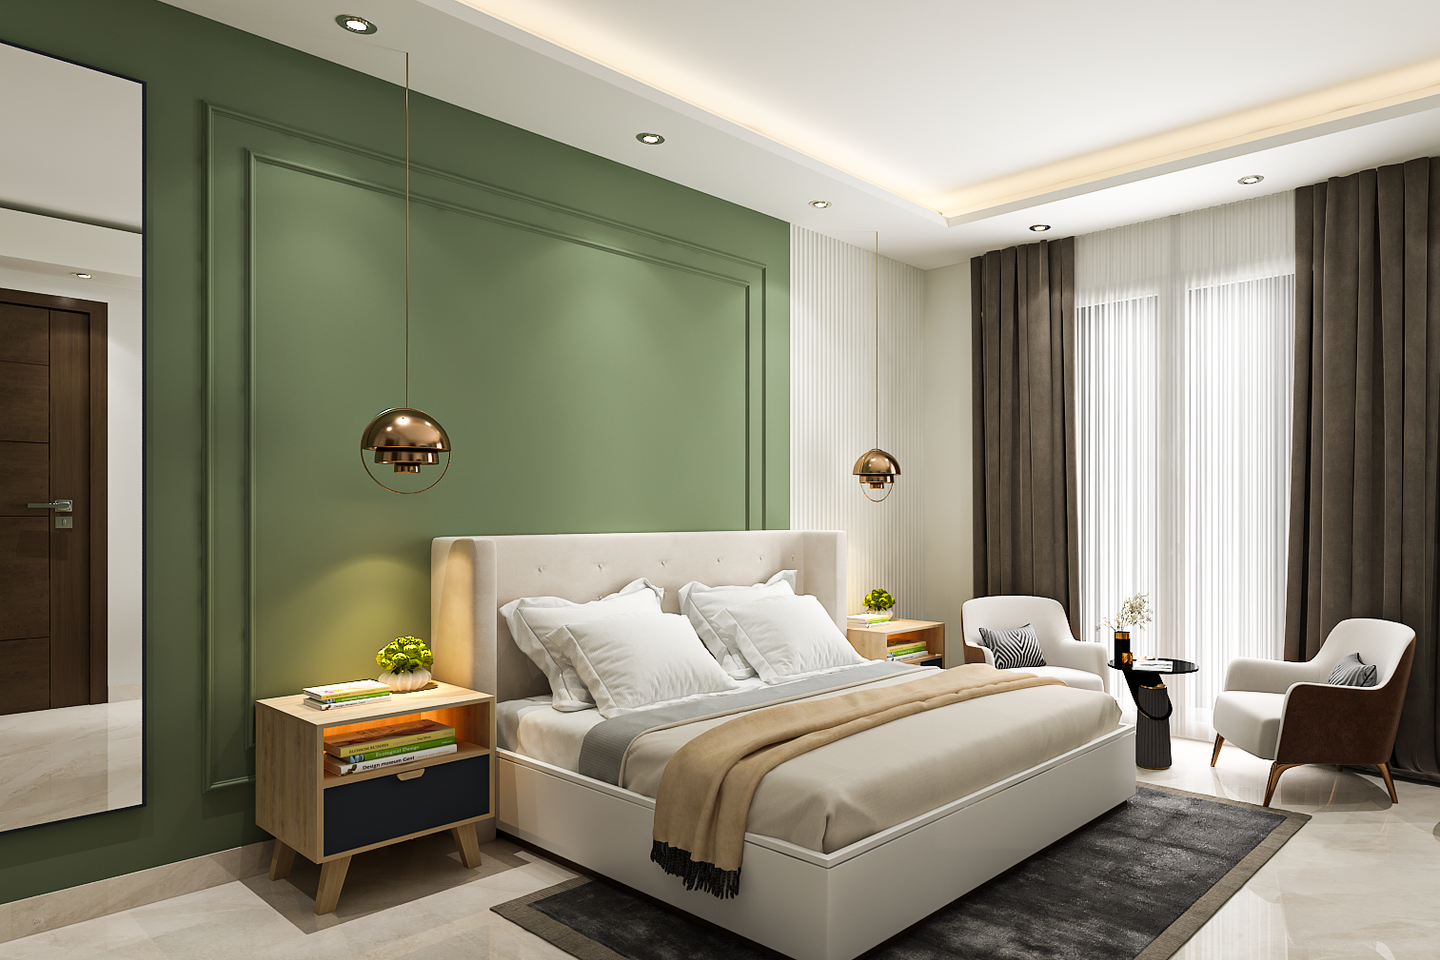 Modern Bedroom Design With Green Wall - Livspace